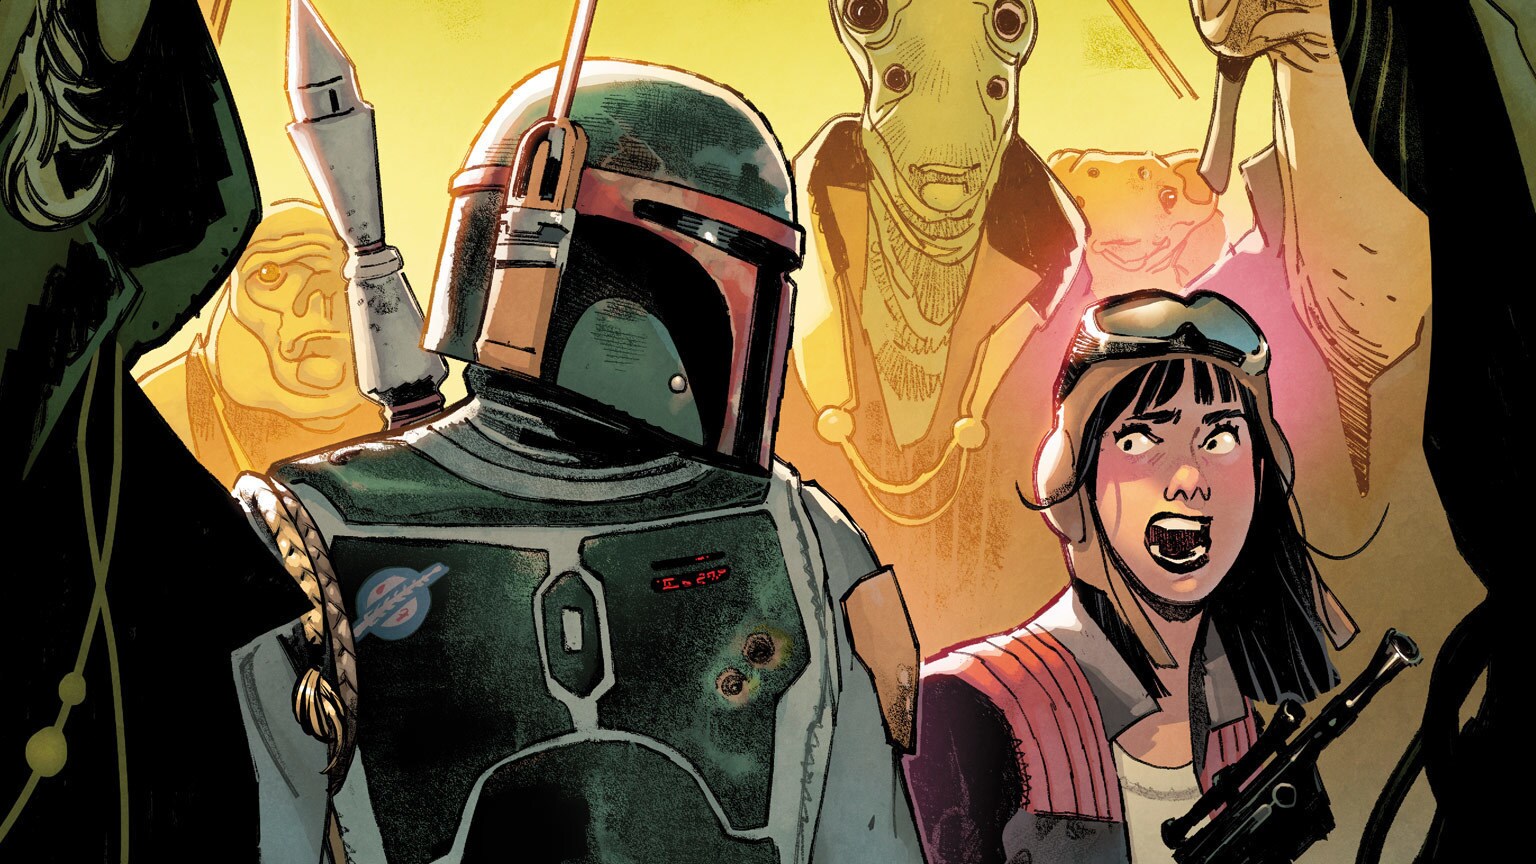 The War of the Bounty Hunters Erupts in Marvel's July 2021 Star Wars Comics - Exclusive